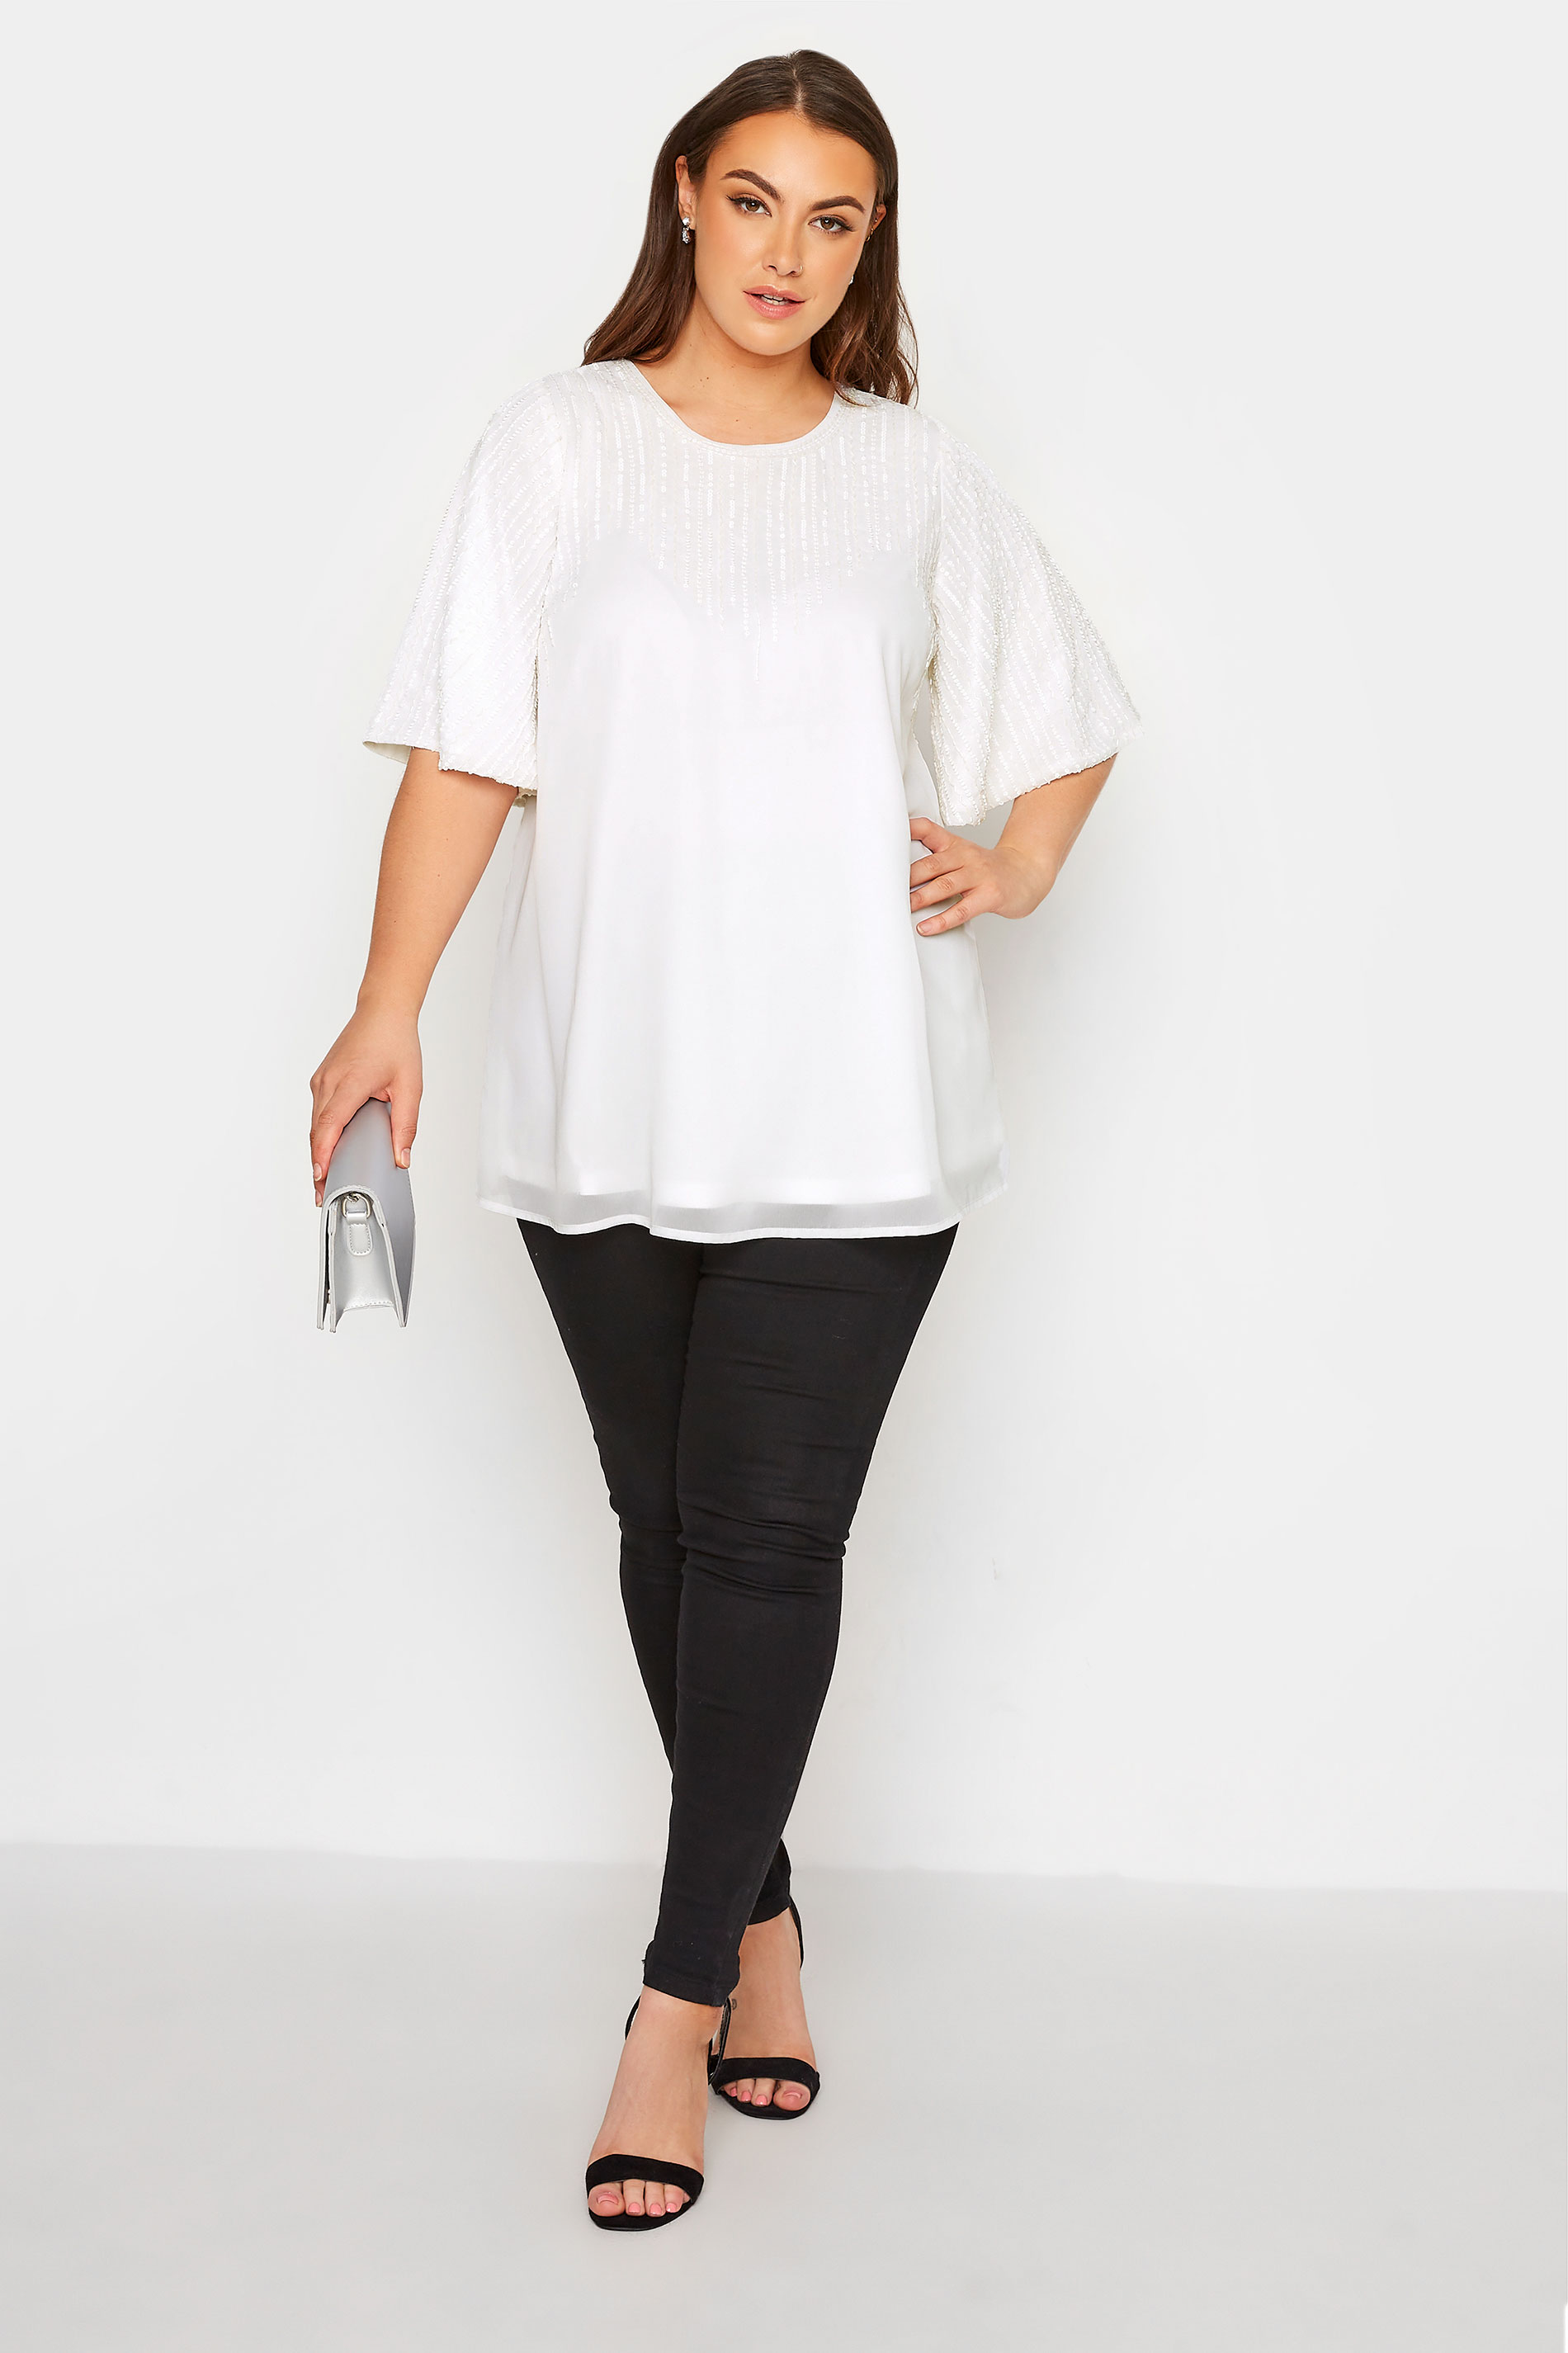 LUXE Plus Size White Sequin Hand Embellished Sweetheart Top | Yours Clothing  2